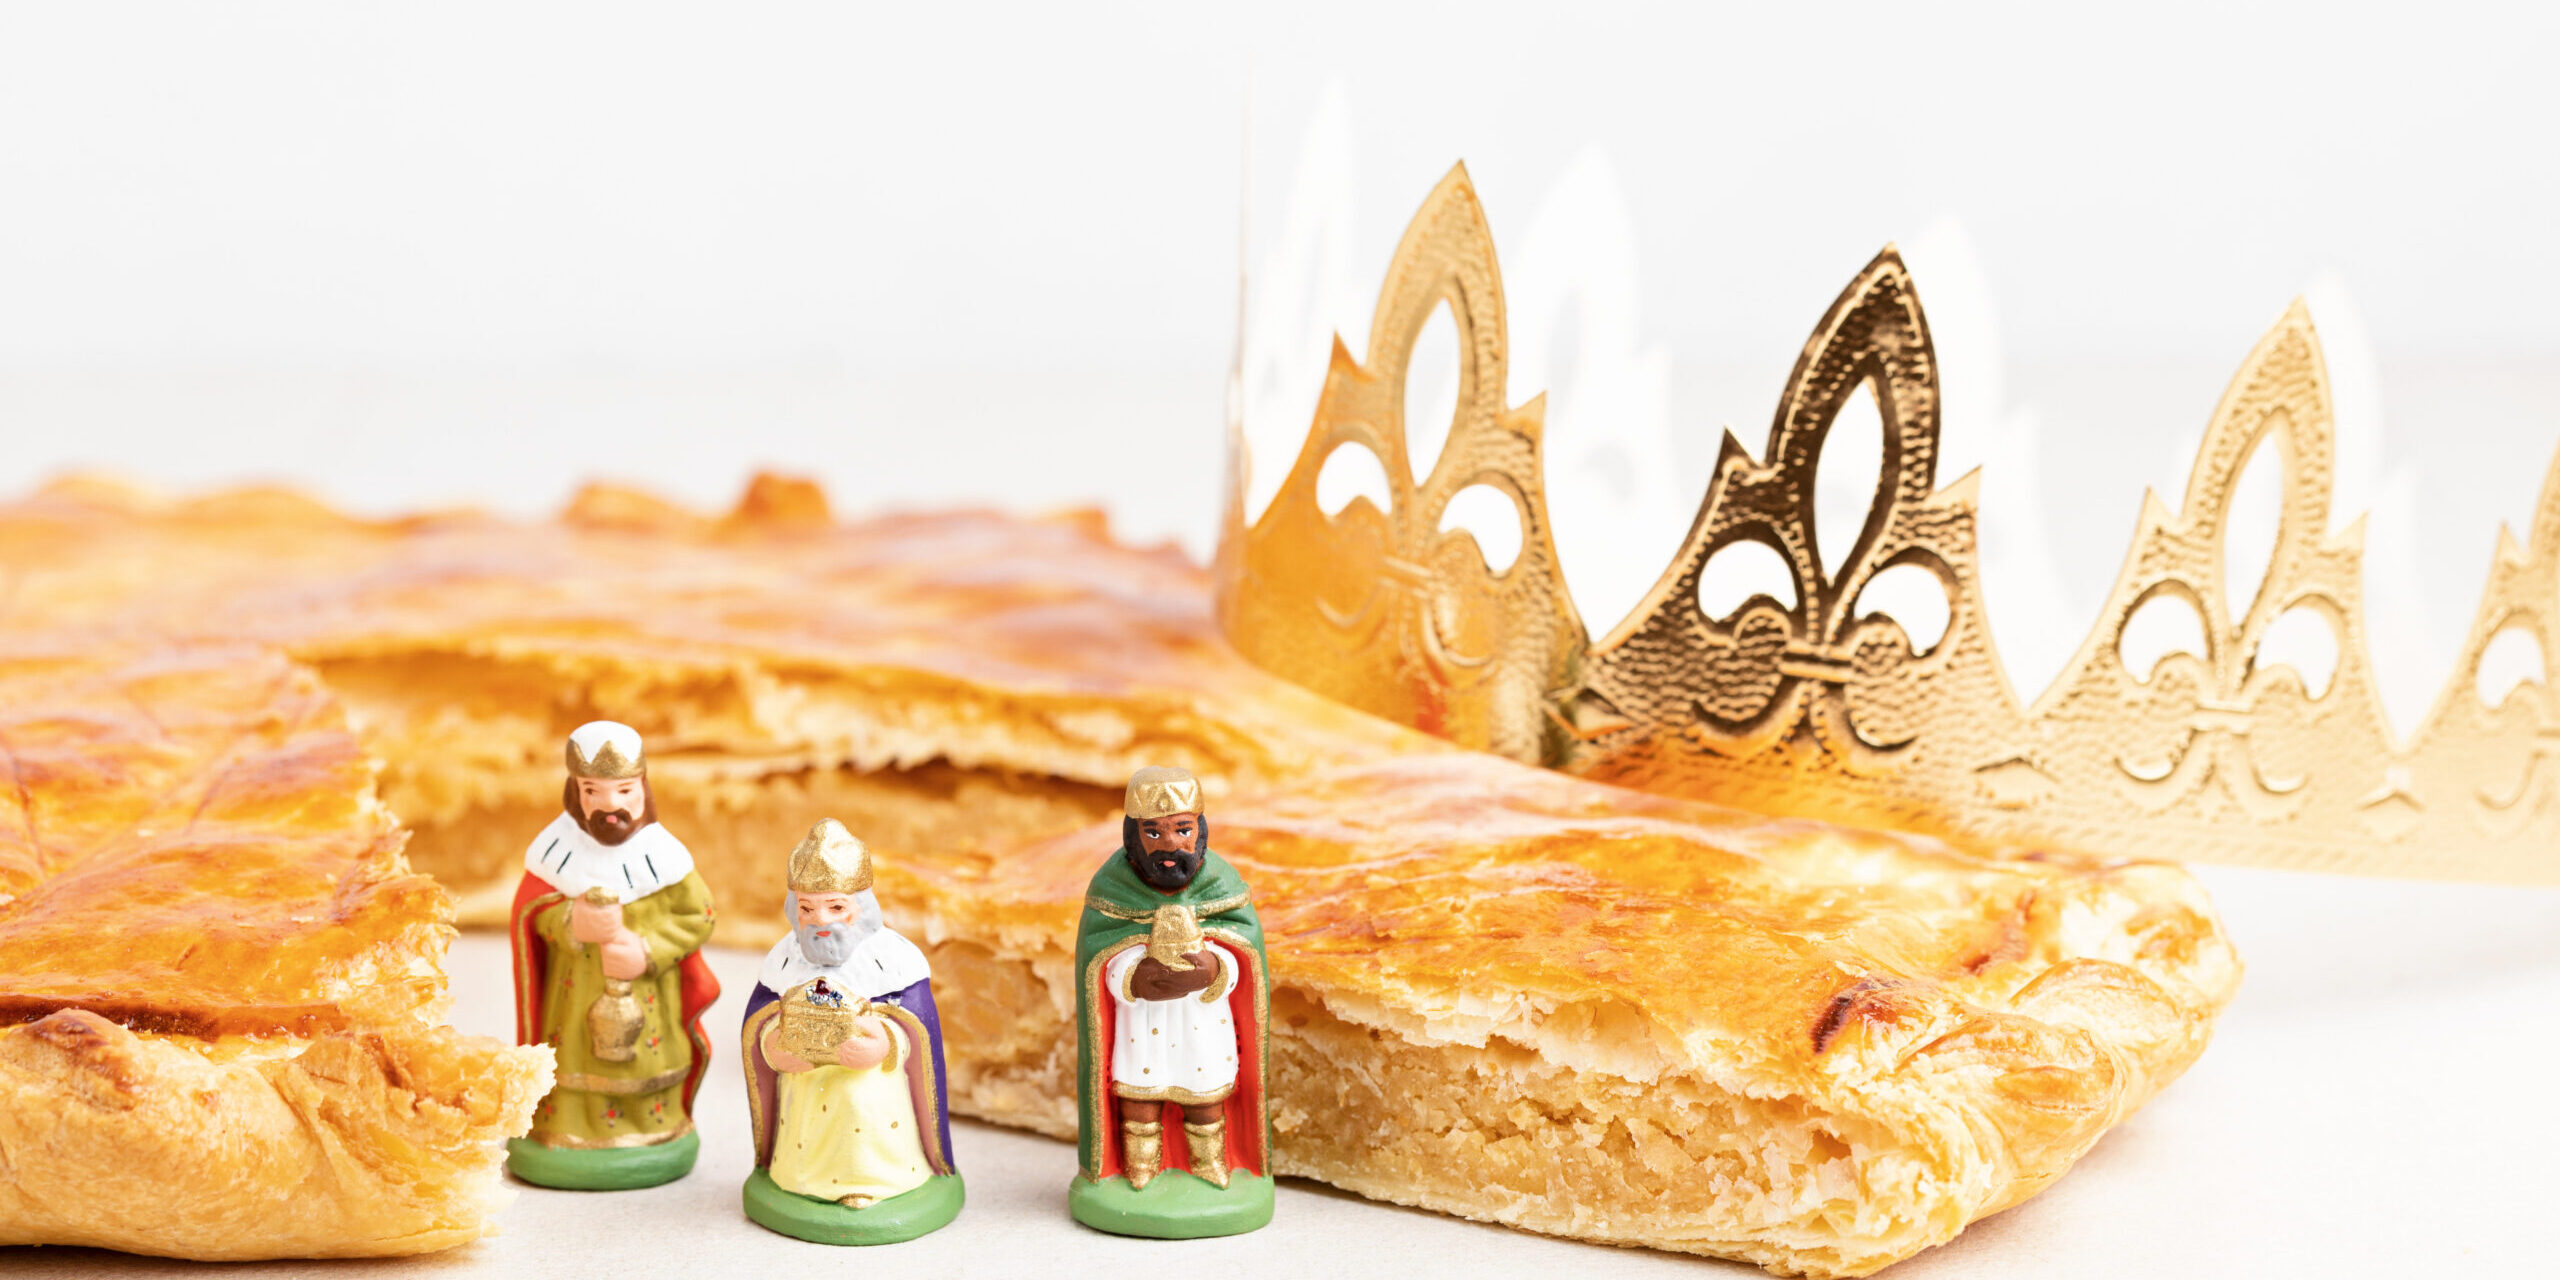 Galette des rois  Wrap It Up by John Peppin, D.O.